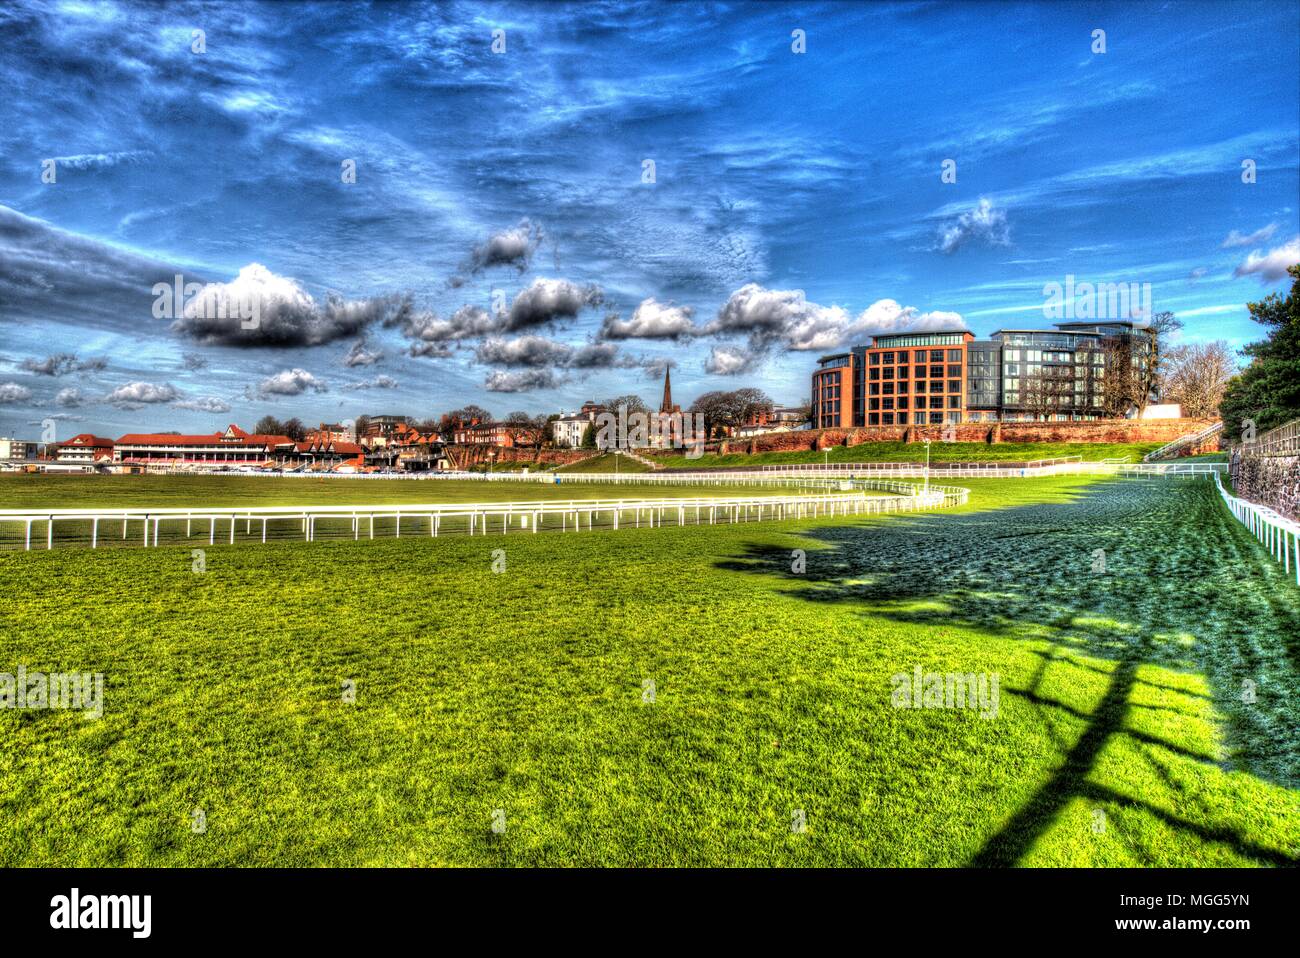 City of Chester, England. Artistic view of Chester racecourse which is situated at the Roodee. Stock Photo